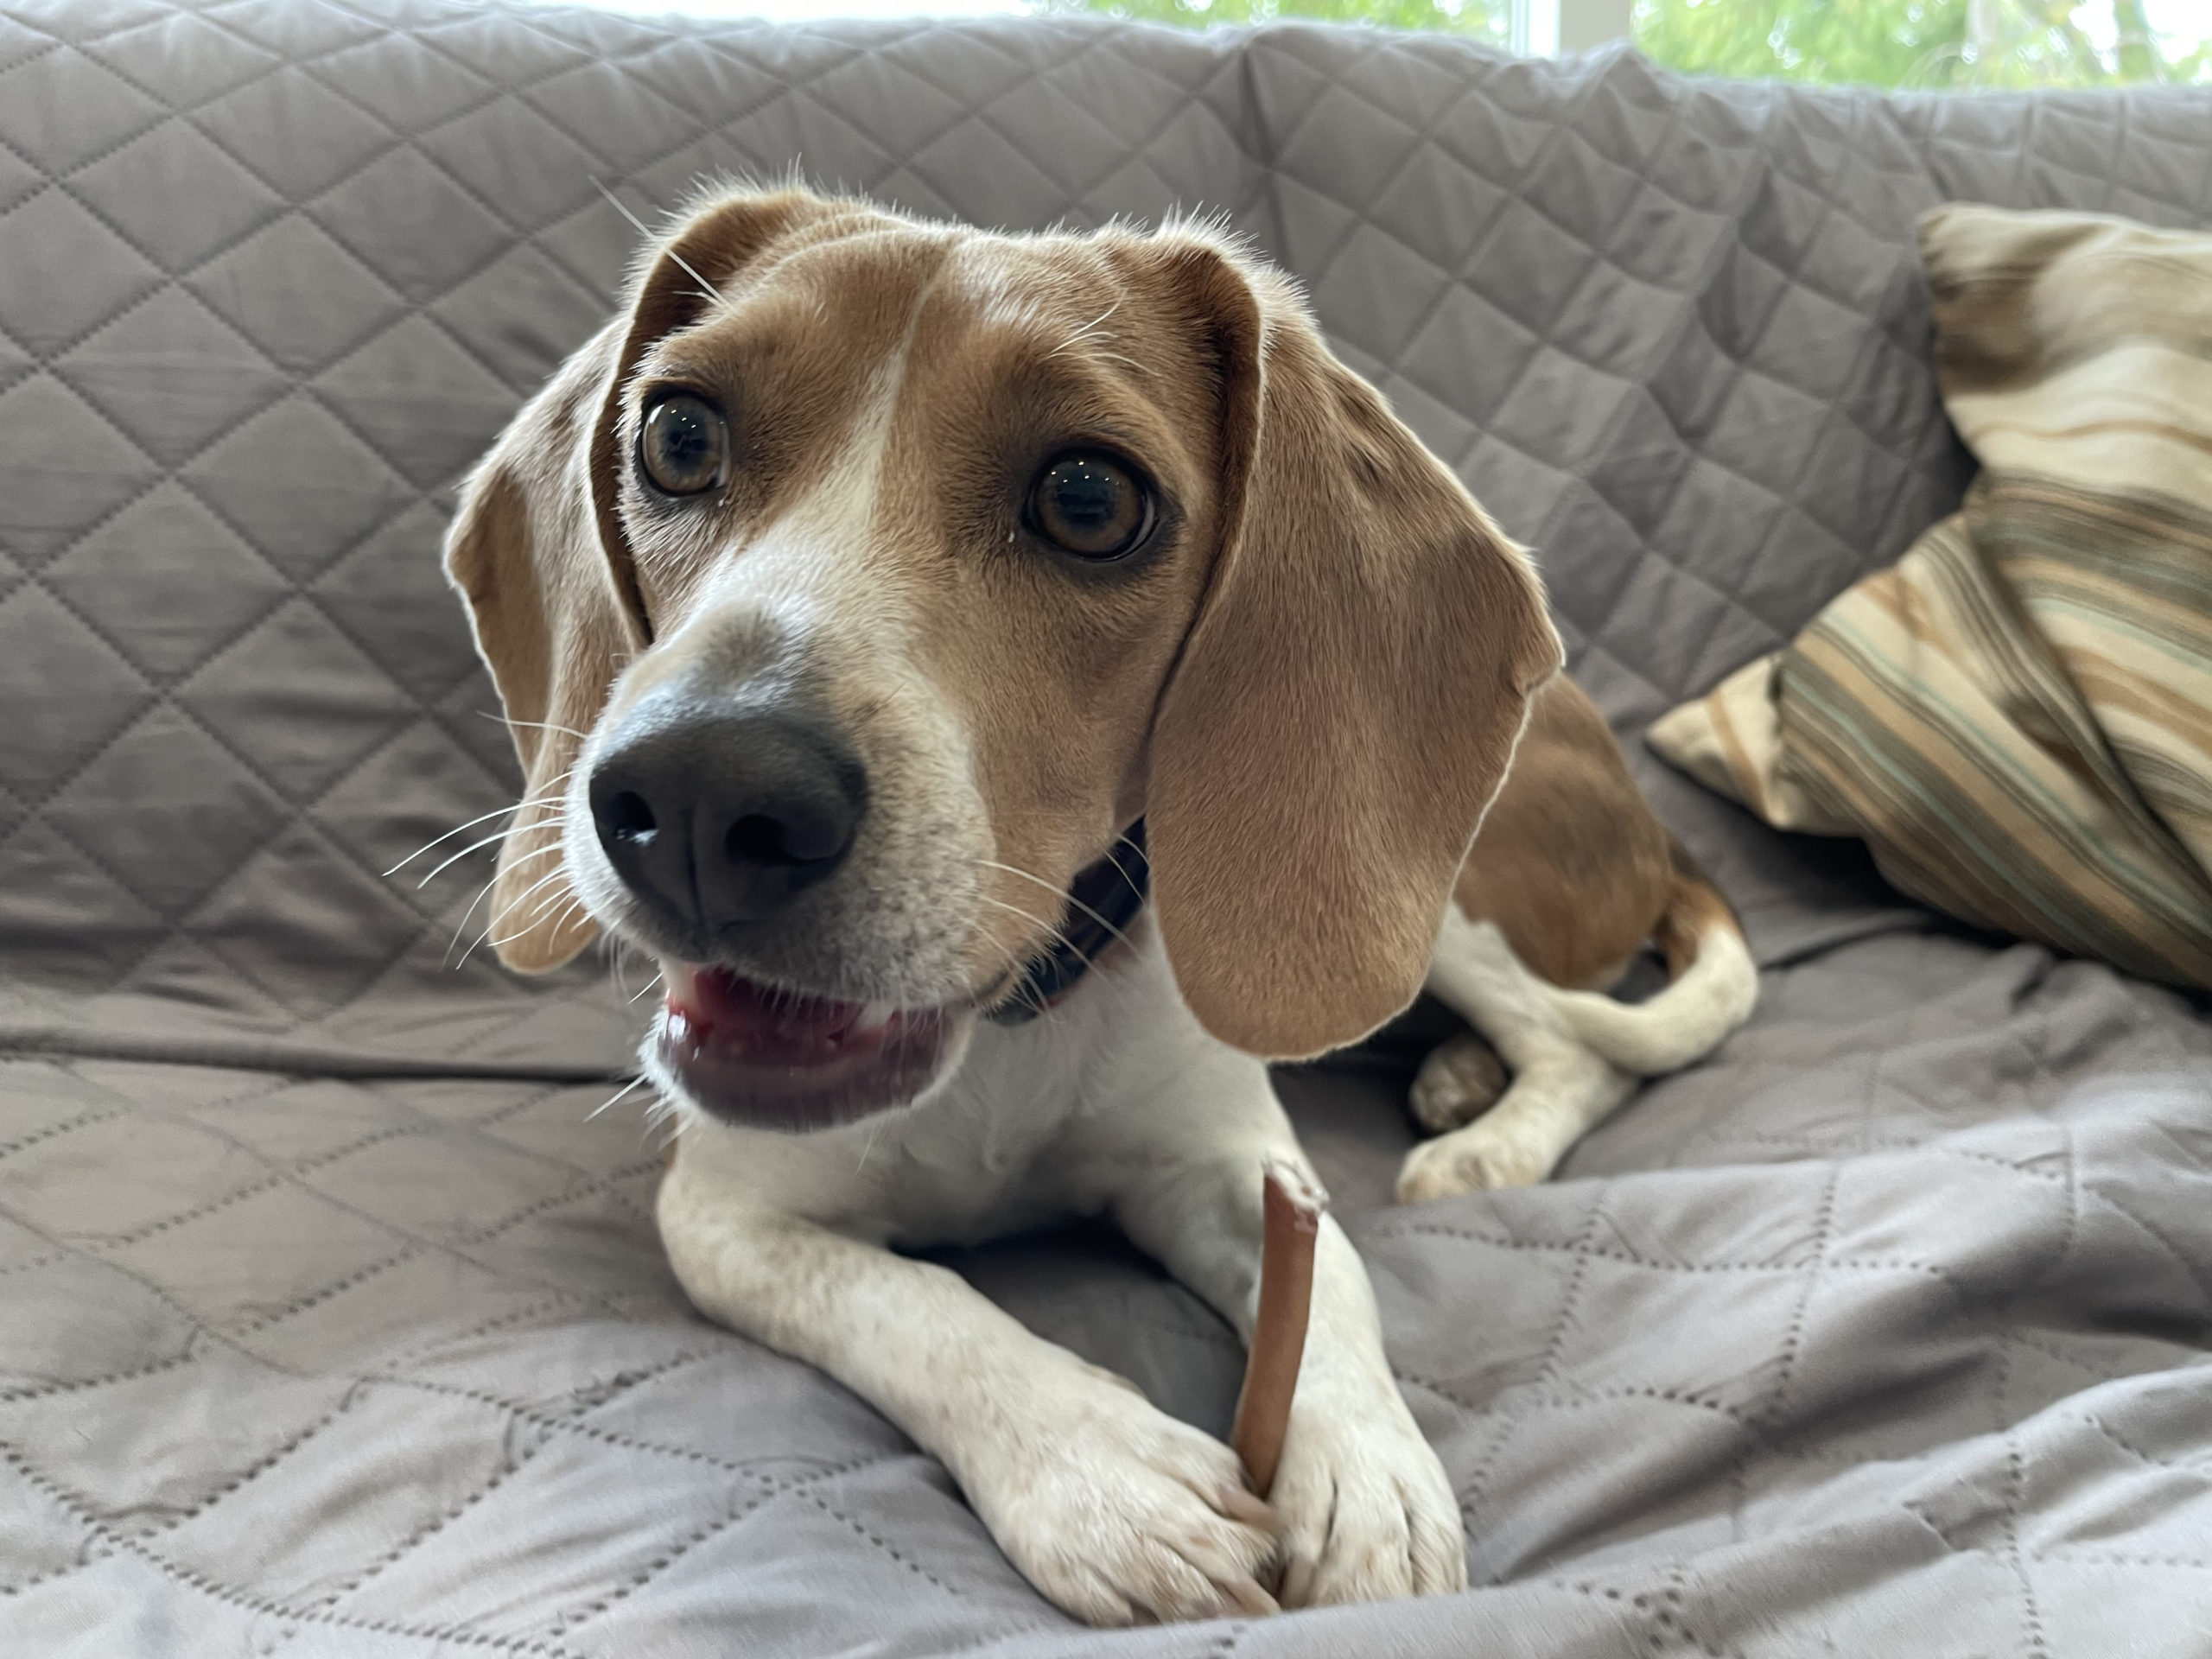 Luna Mar Vista Beagle scaled - Helping a Beagle Puppy Get Over Its Separation Anxiety with a LTCA